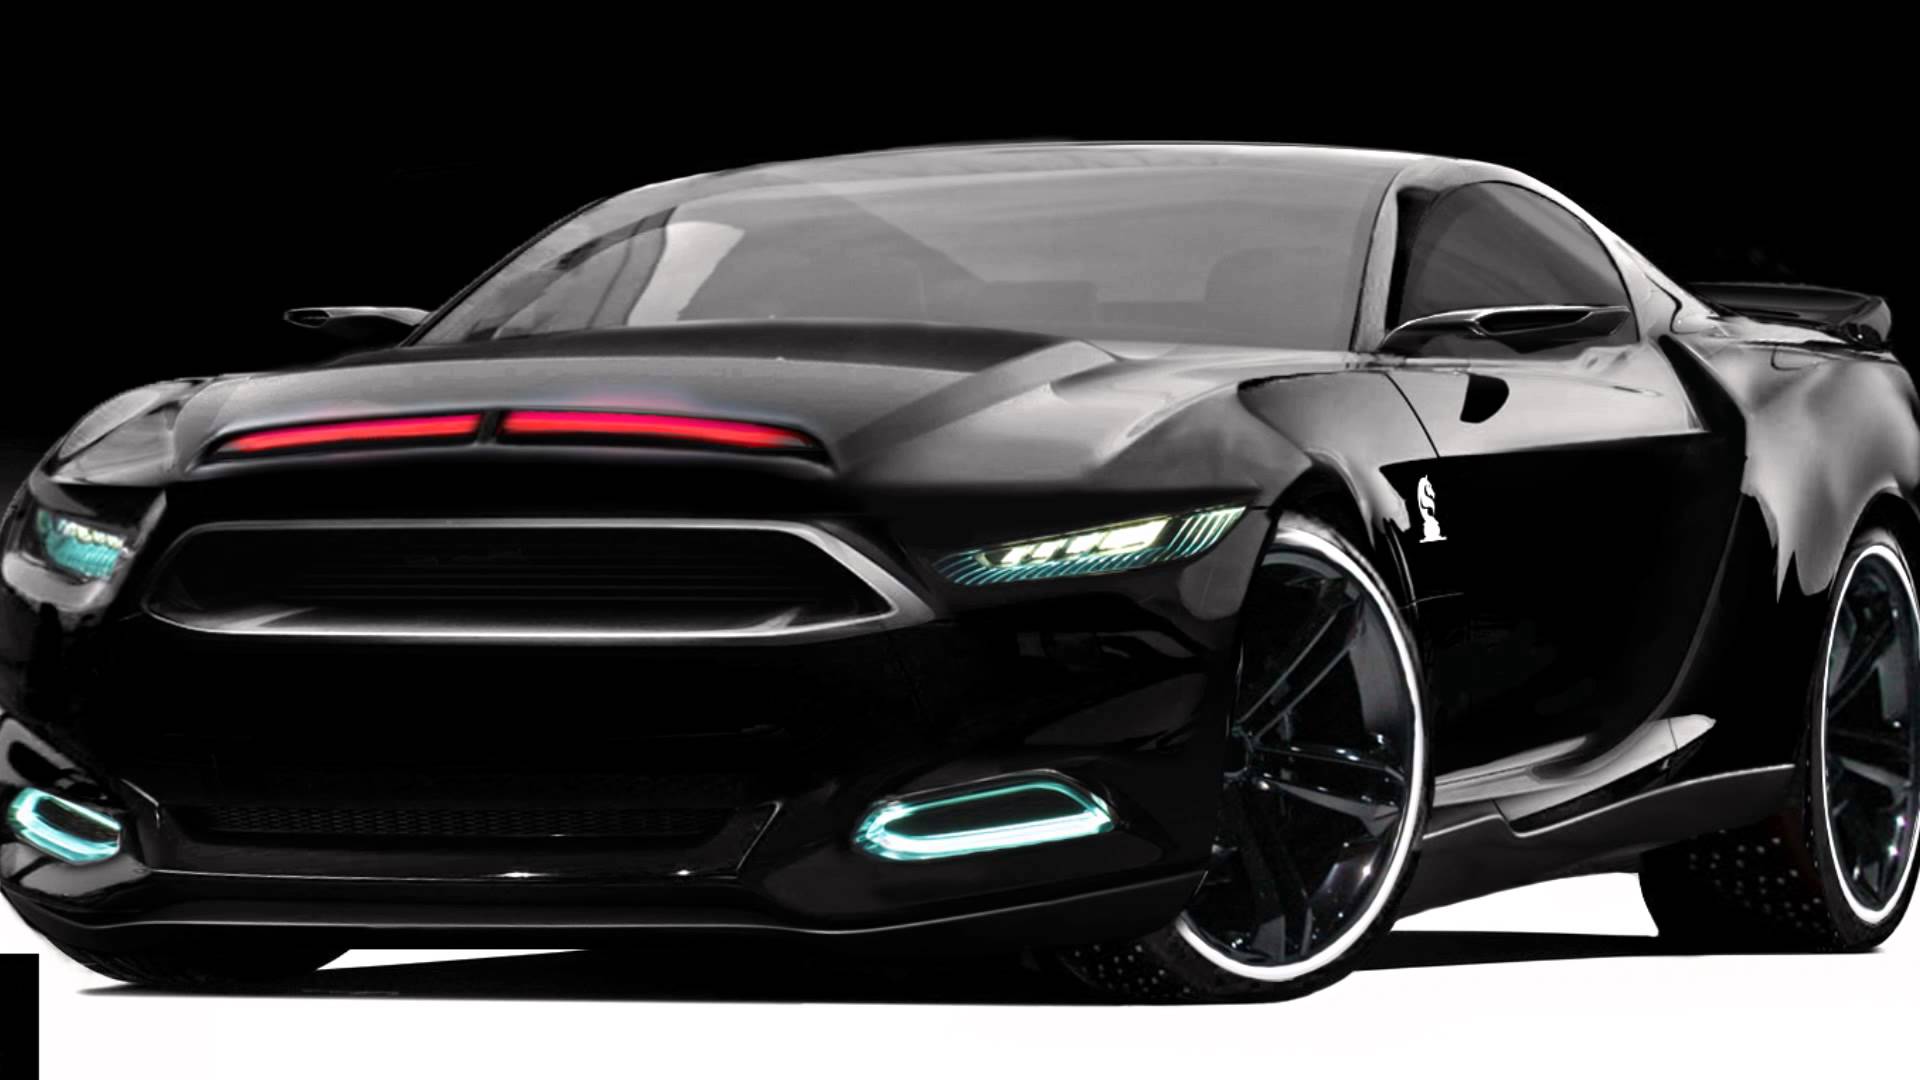 Cars Vehicles Ford Mustang Knight Rider Wallpapers Hd Desktop And Mobile Backgrounds